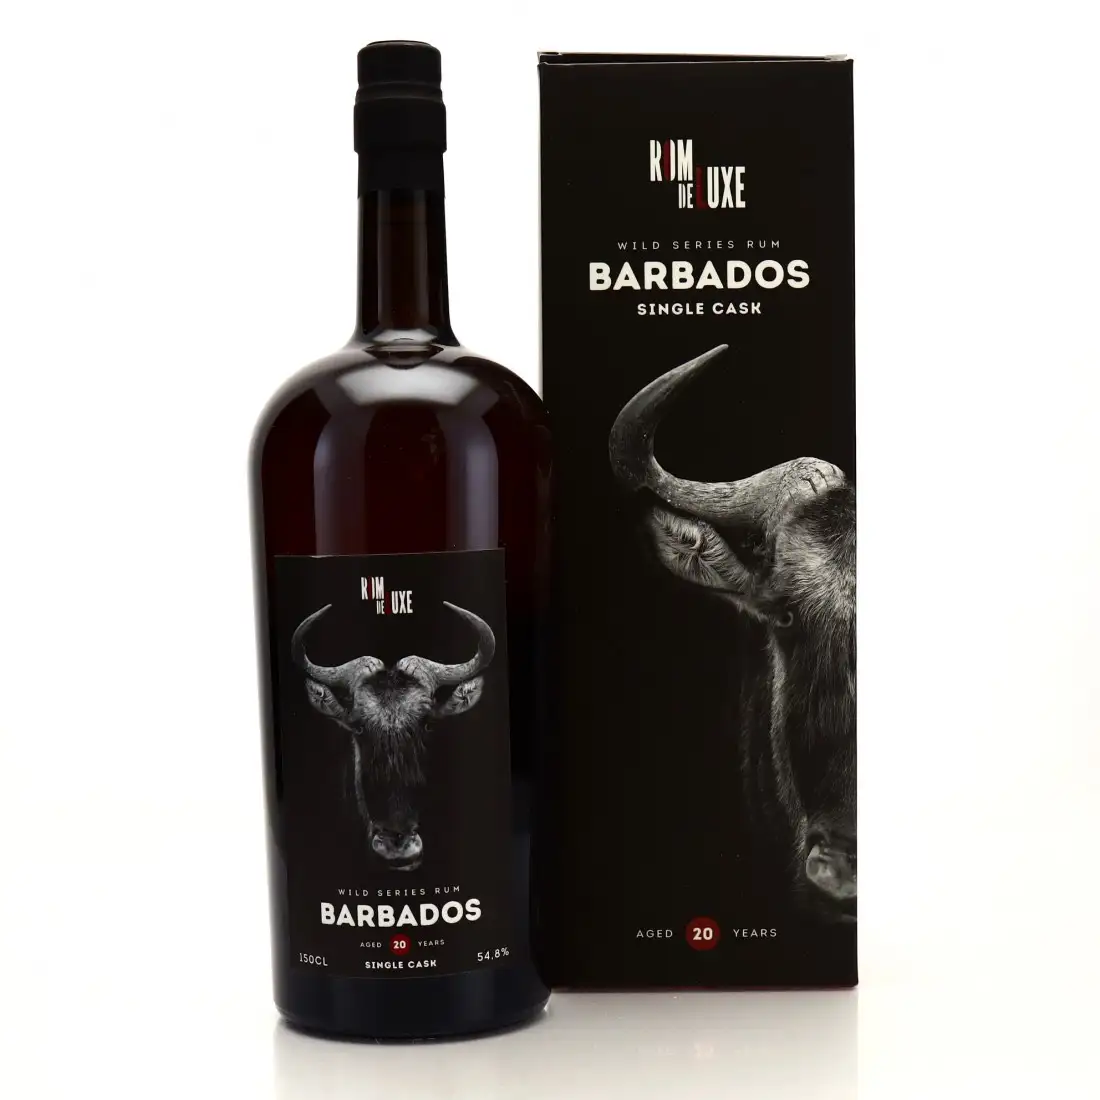 Image of the front of the bottle of the rum Wild Series Rum Barbados No. 22 (Magnum) BMMG